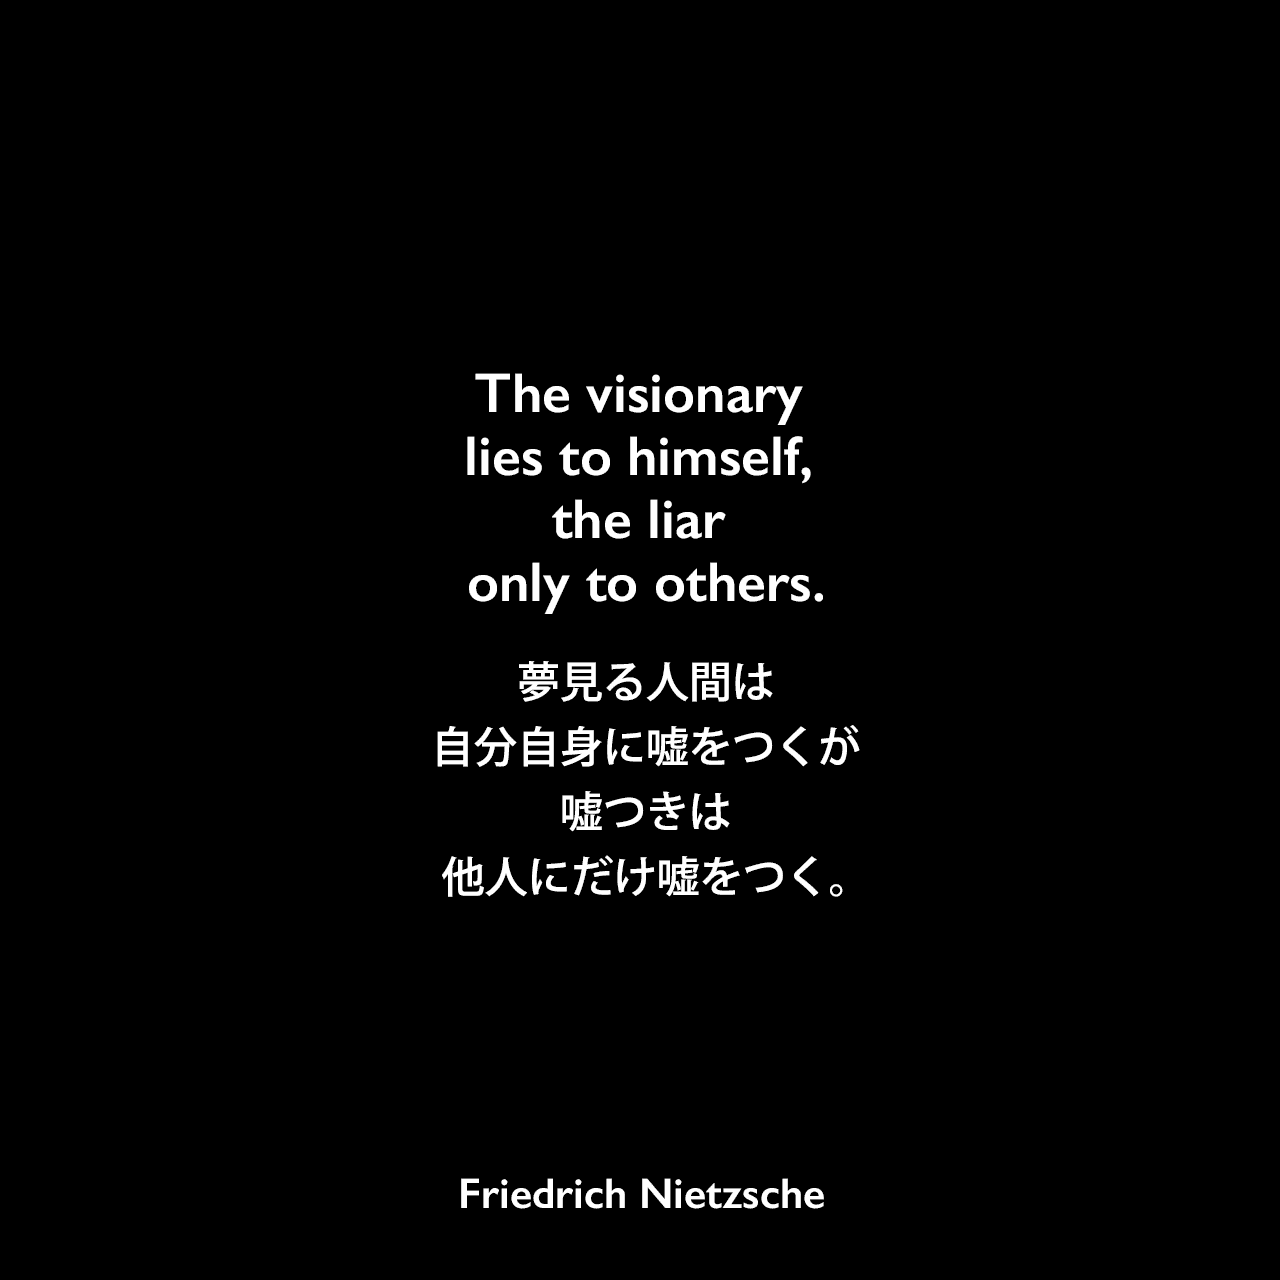 The visionary lies to himself, the liar only to others.夢見る人間は自分自身に嘘をつくが、嘘つきは他人にだけ嘘をつく。Friedrich Nietzsche